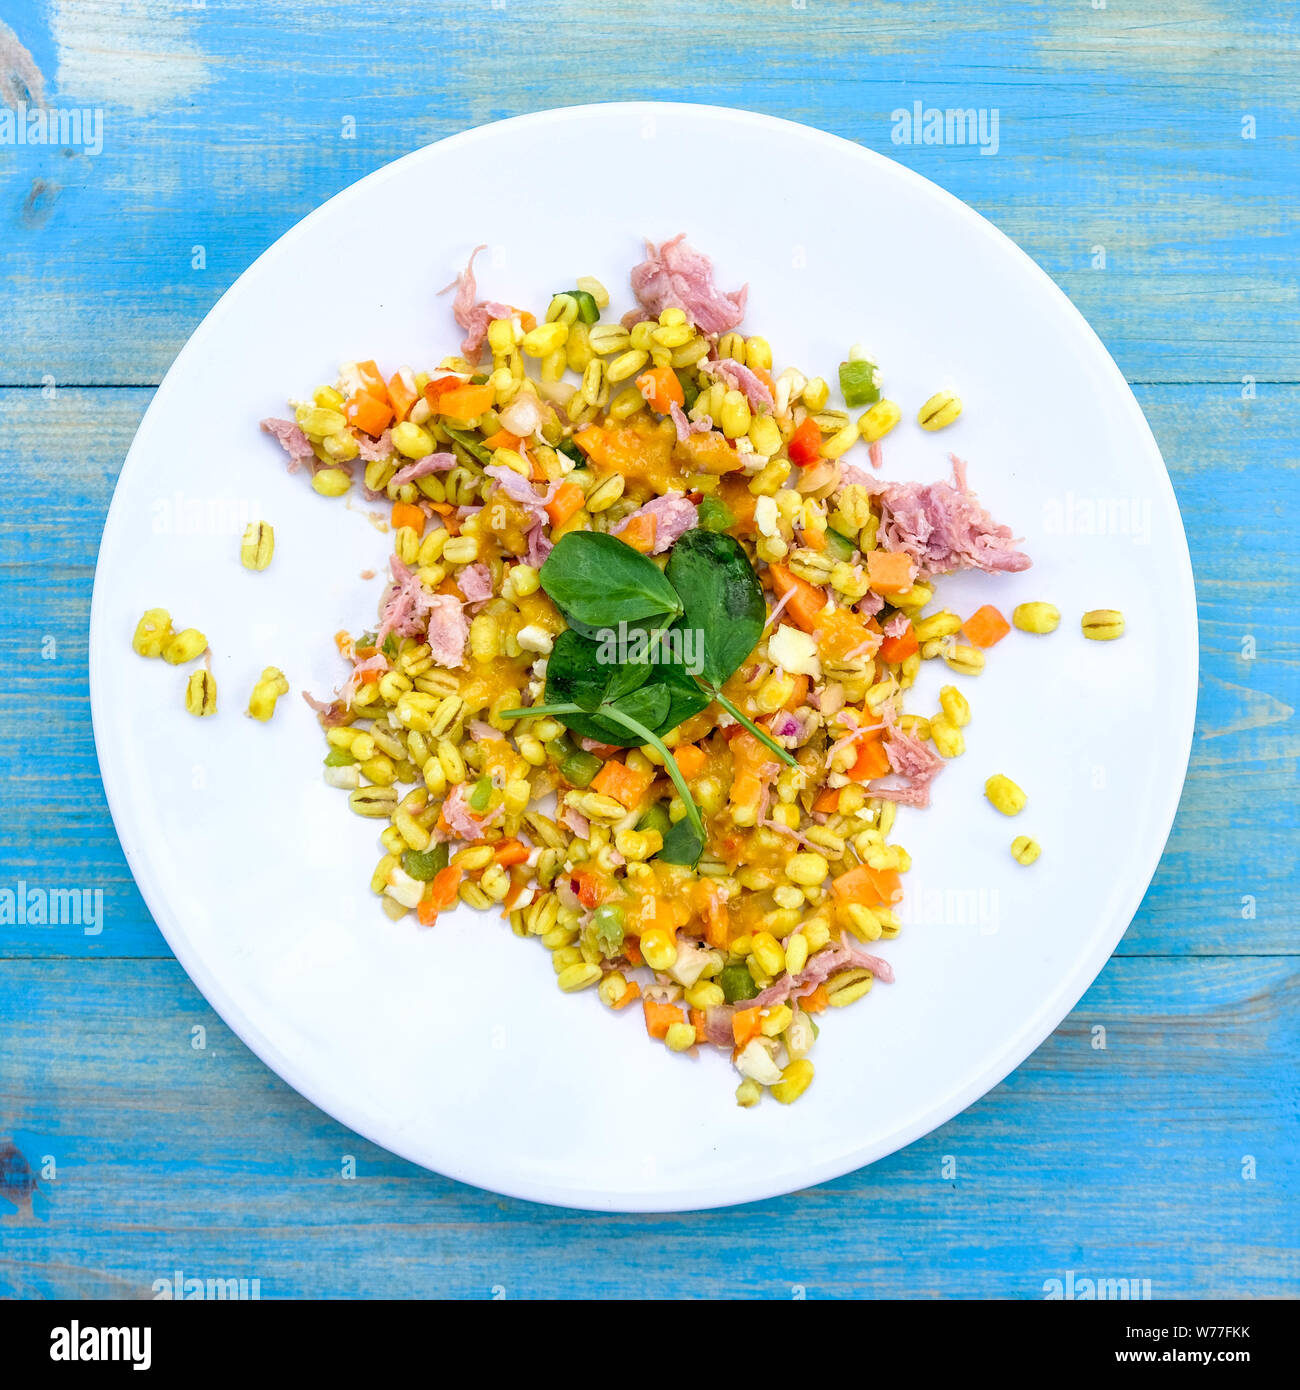 Healthy Ham Hock Summer Salad With Pearl Barley Cereals, Peppers and Piccalilli Dressing Stock Photo